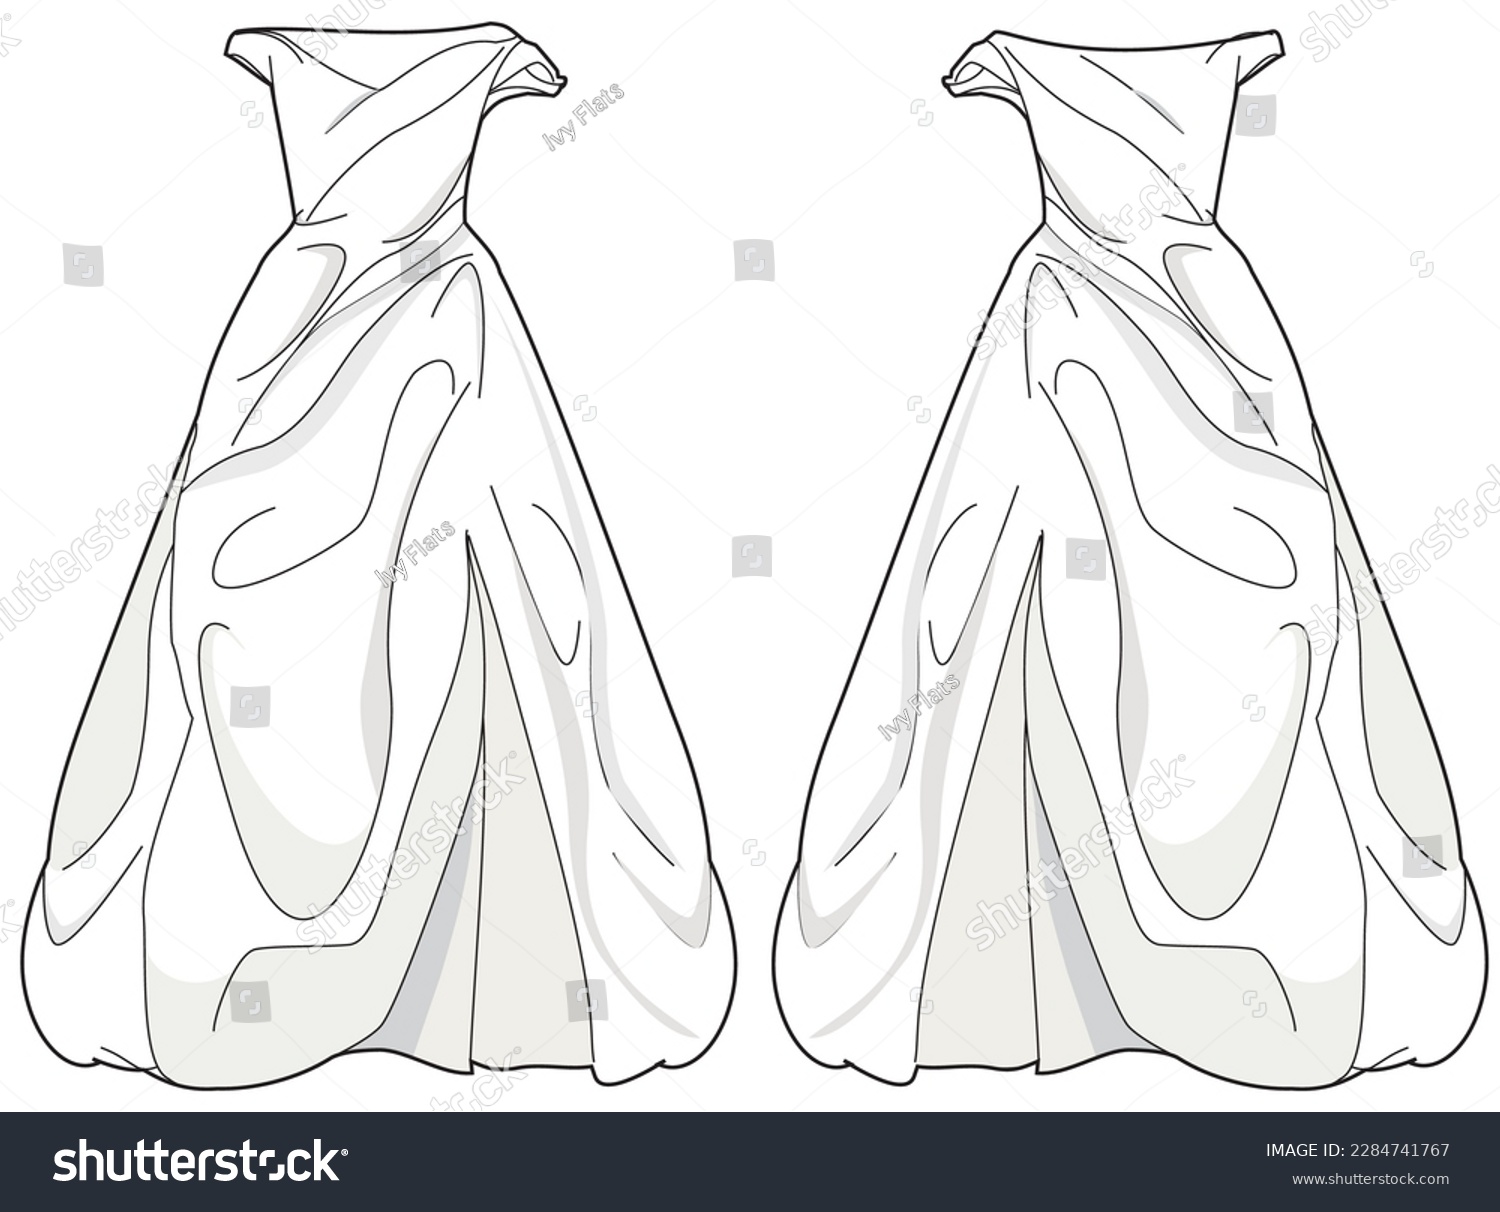 SVG of Off shoulder draped ball gown wedding dress design flat sketch fashion illustration with front and back view, Strapless draped bridal dress flat sketch cad drawing template svg